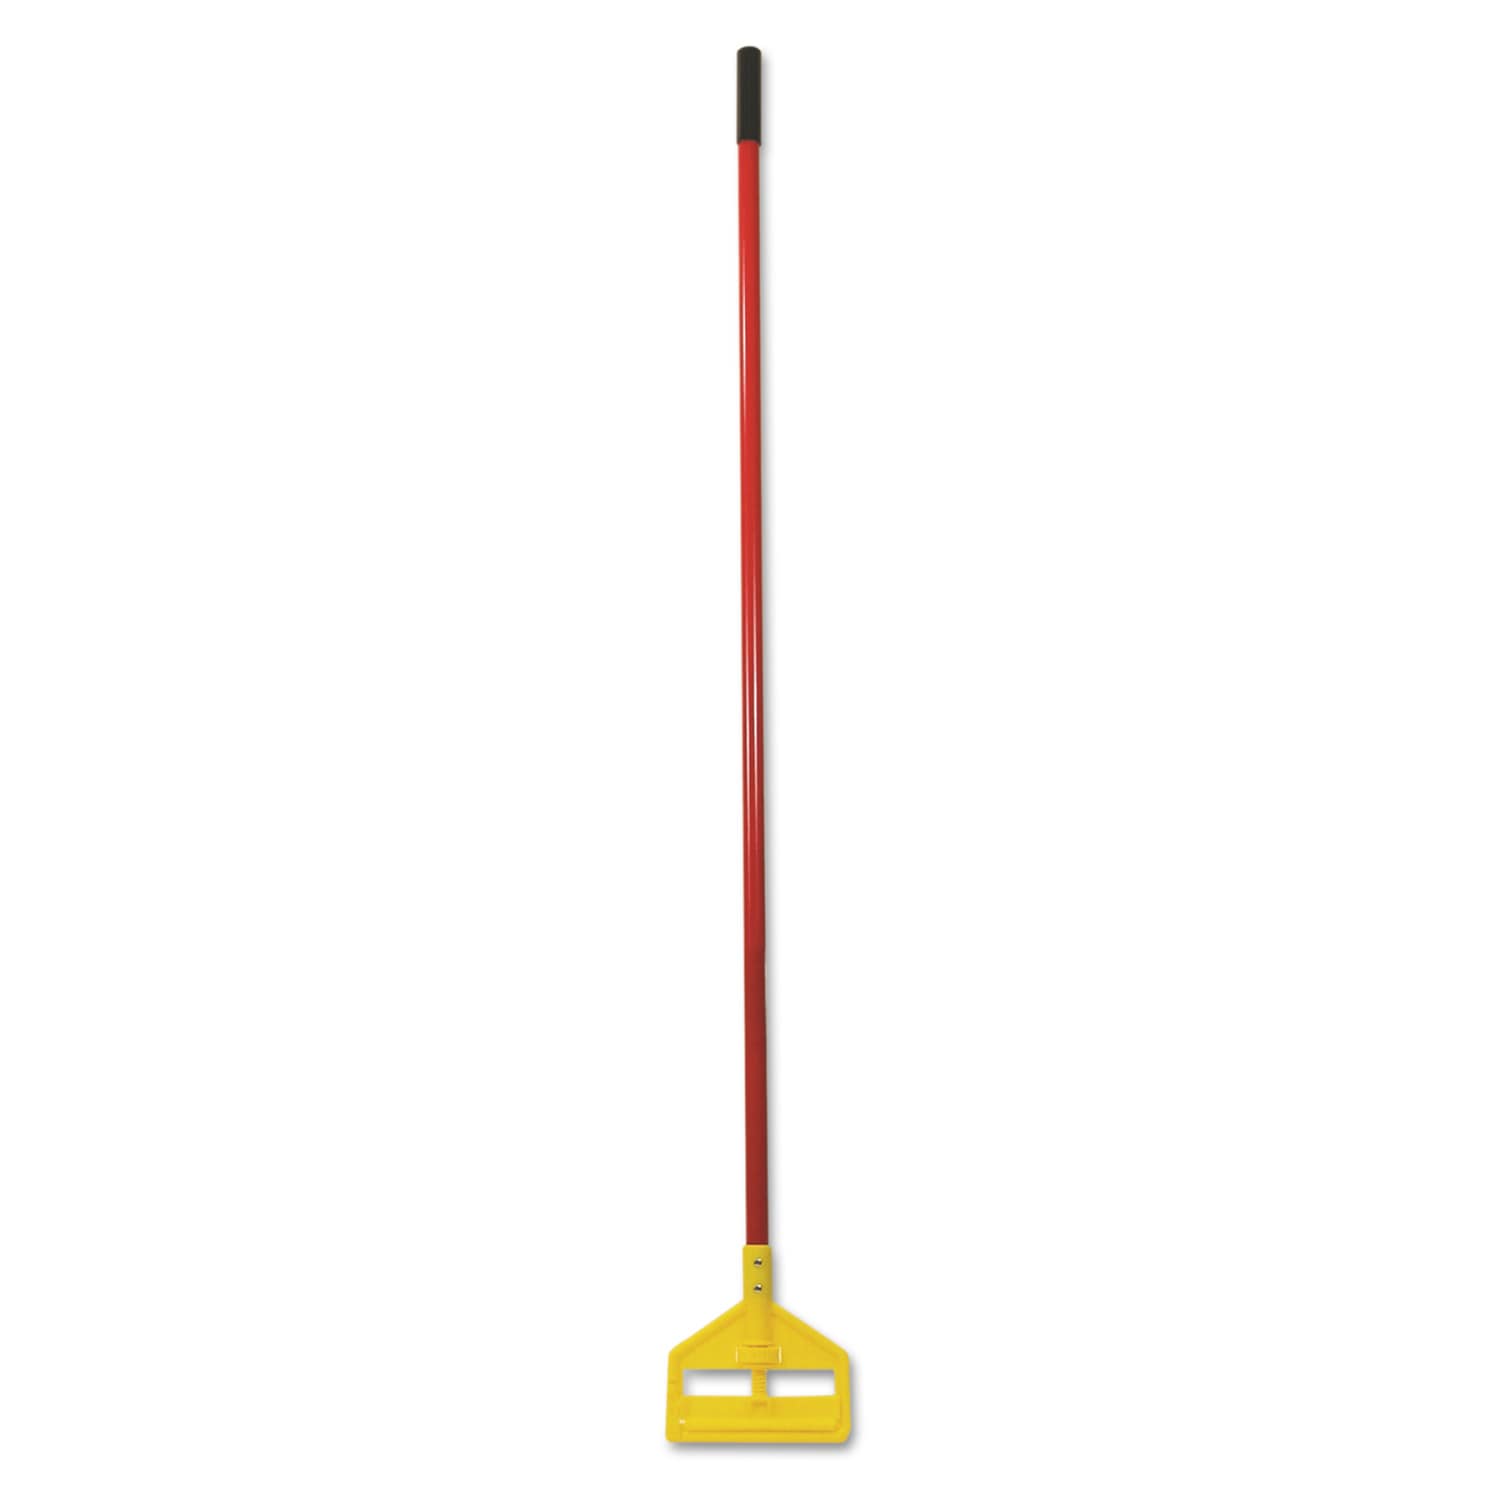 Rubbermaid Invader Aluminum Side-Gate Wet-Mop Handle, 60, Gray/Yellow